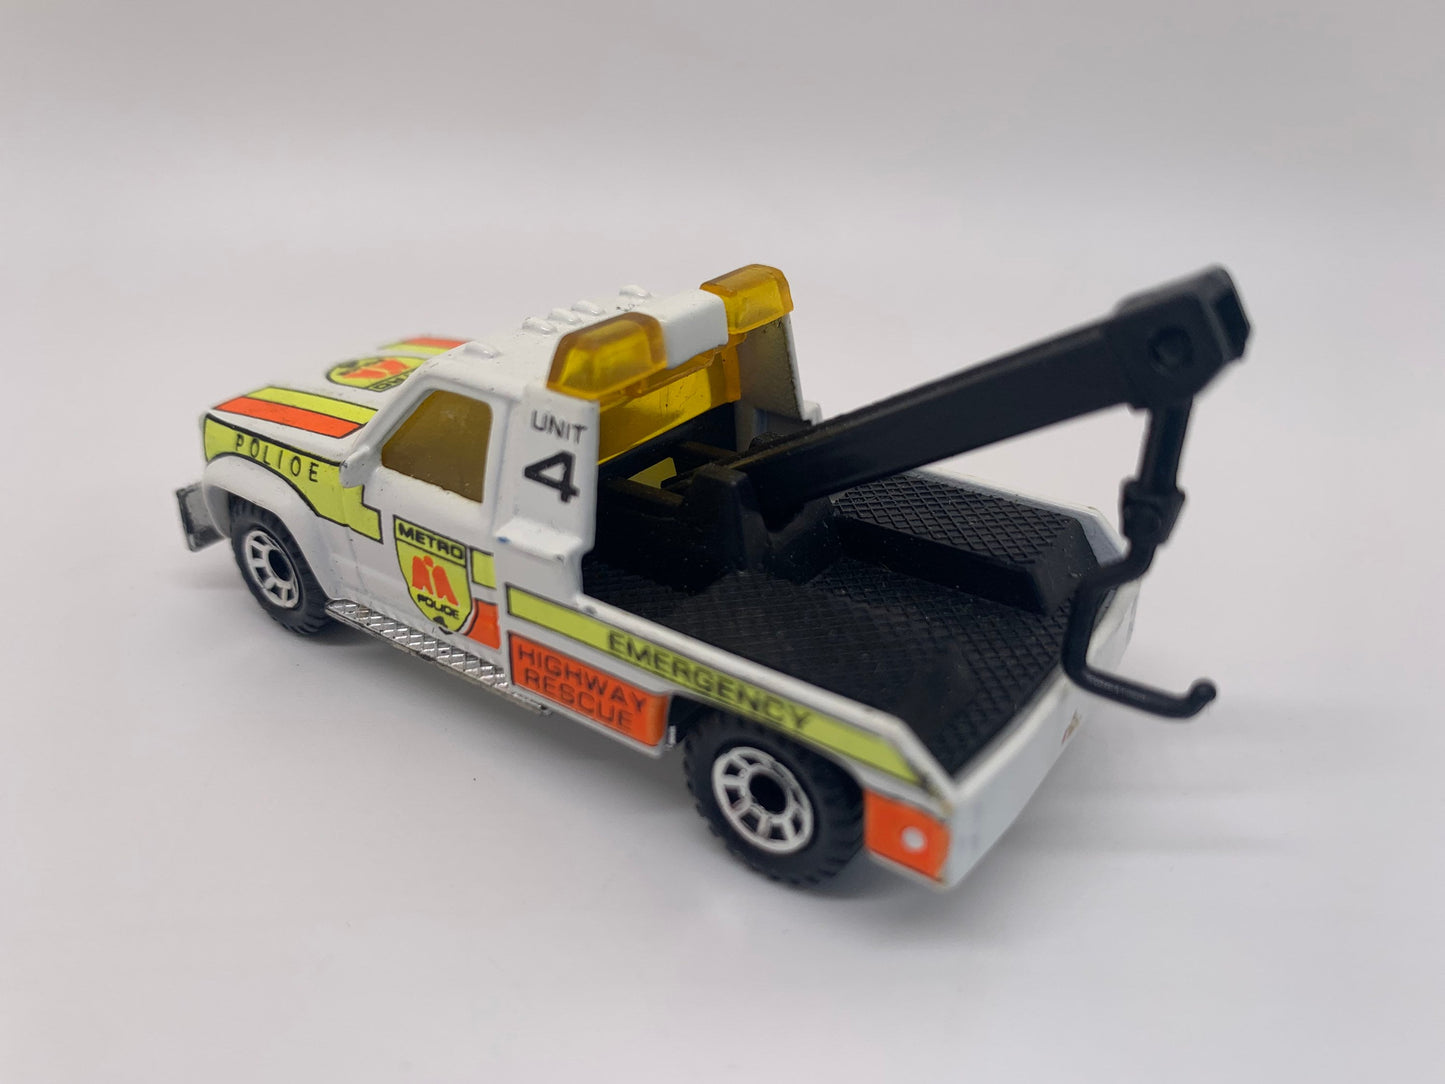 Matchbox GMC Wrecker White Metro Police Highway Emergency Perfect Birthday Gift Miniature Collectable Scale Model Toy Car